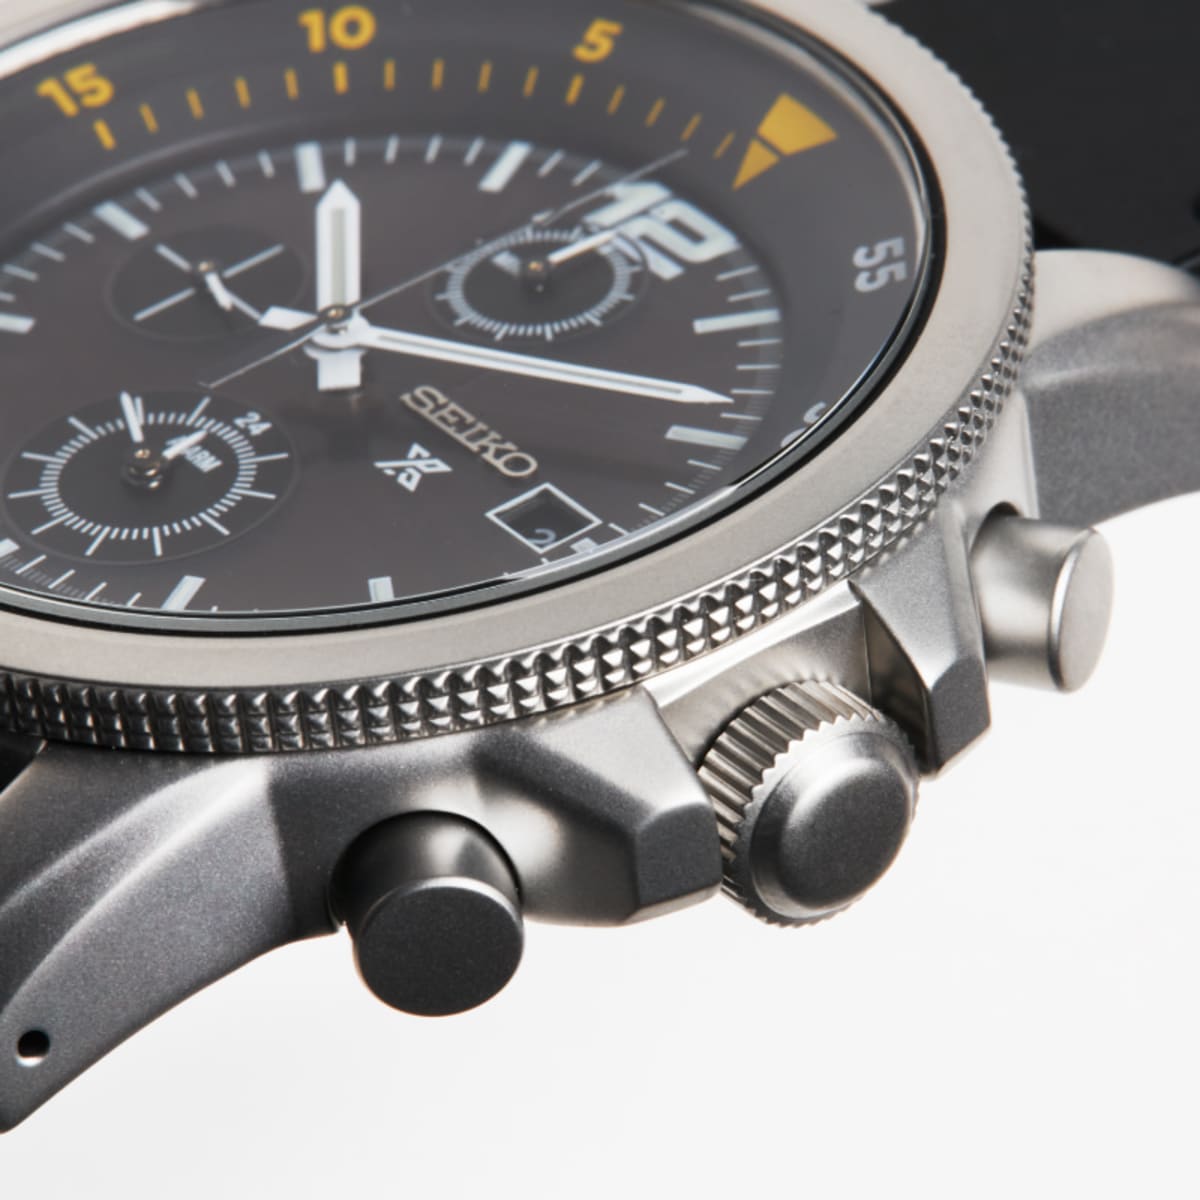 Seiko and nonnative release their third watch - Acquire